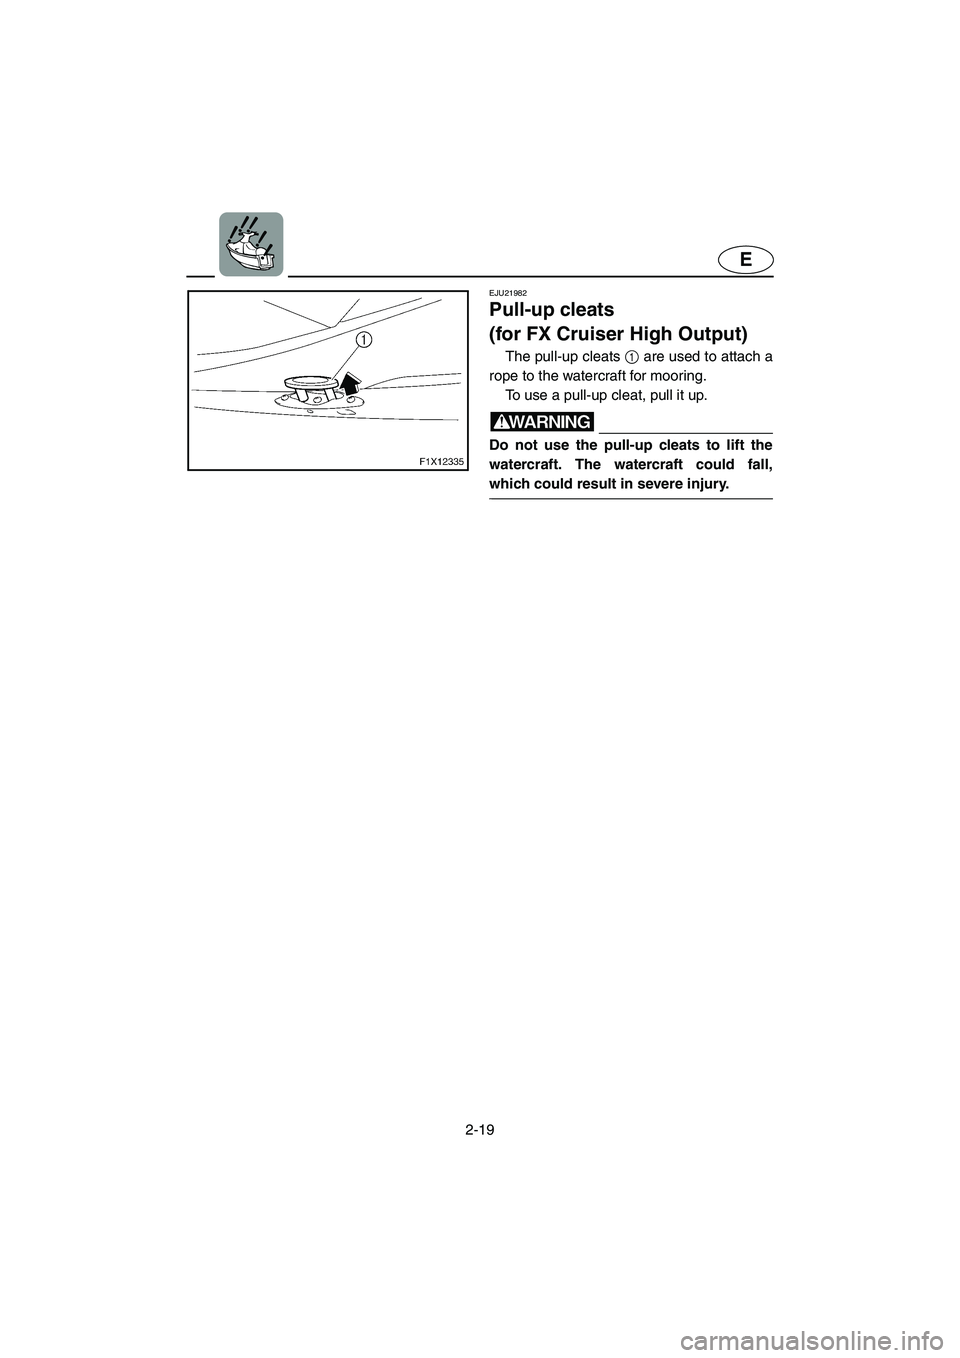 YAMAHA FX HO 2006 Service Manual 2-19
E
EJU21982 
Pull-up cleats 
(for FX Cruiser High Output) 
The pull-up cleats 1 are used to attach a
rope to the watercraft for mooring. 
To use a pull-up cleat, pull it up.
WARNING@ Do not use th